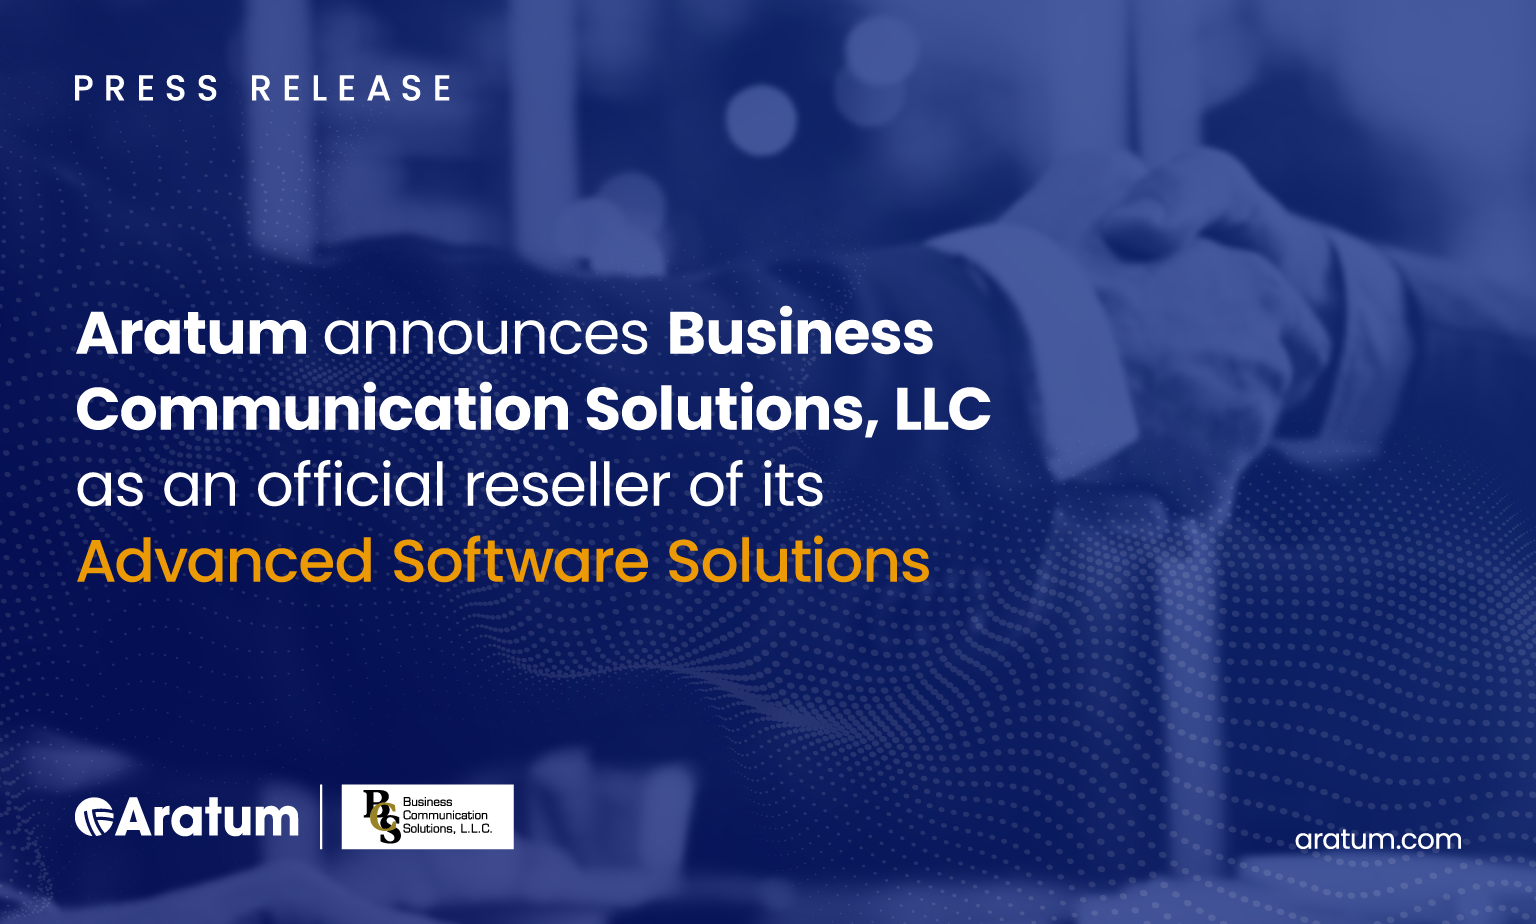 Aratum Announces Business Communication Solutions, LLC as an Official Reseller of Its Advanced Software Solutions